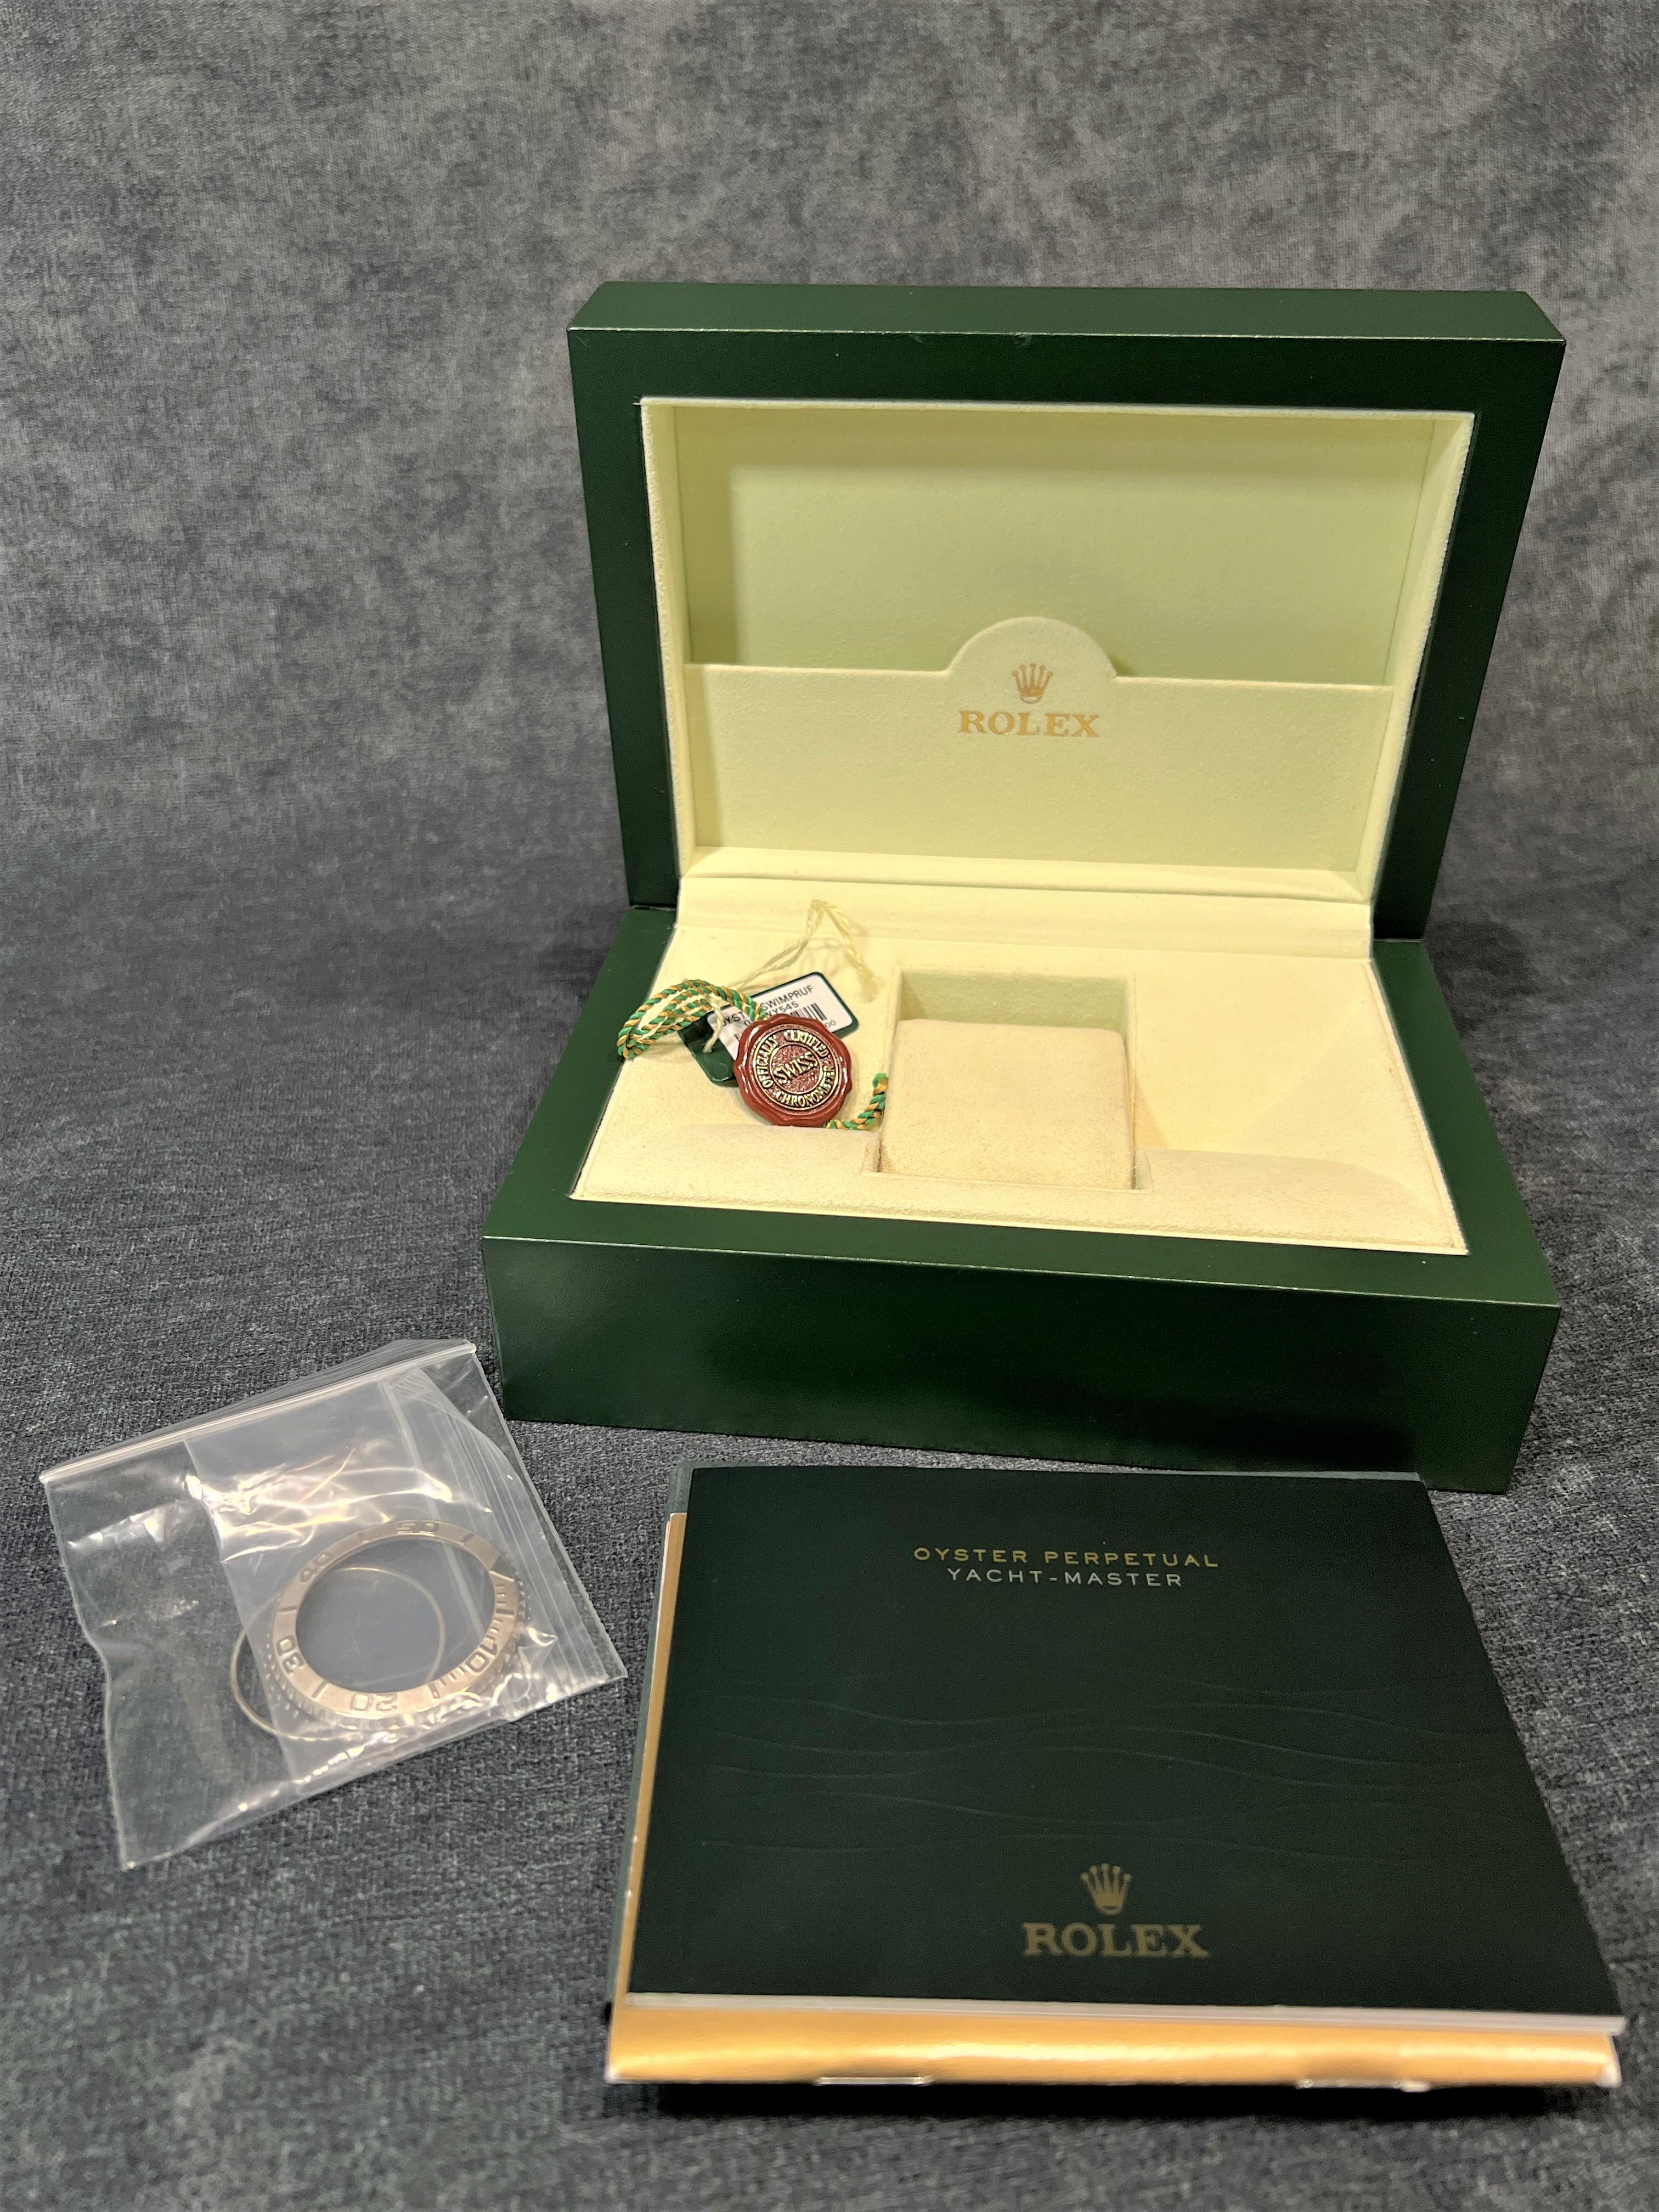 Rolex Oyster Perpetual Yacht-Master 2.56 CTW Diamond Wristwatch For Sale 7